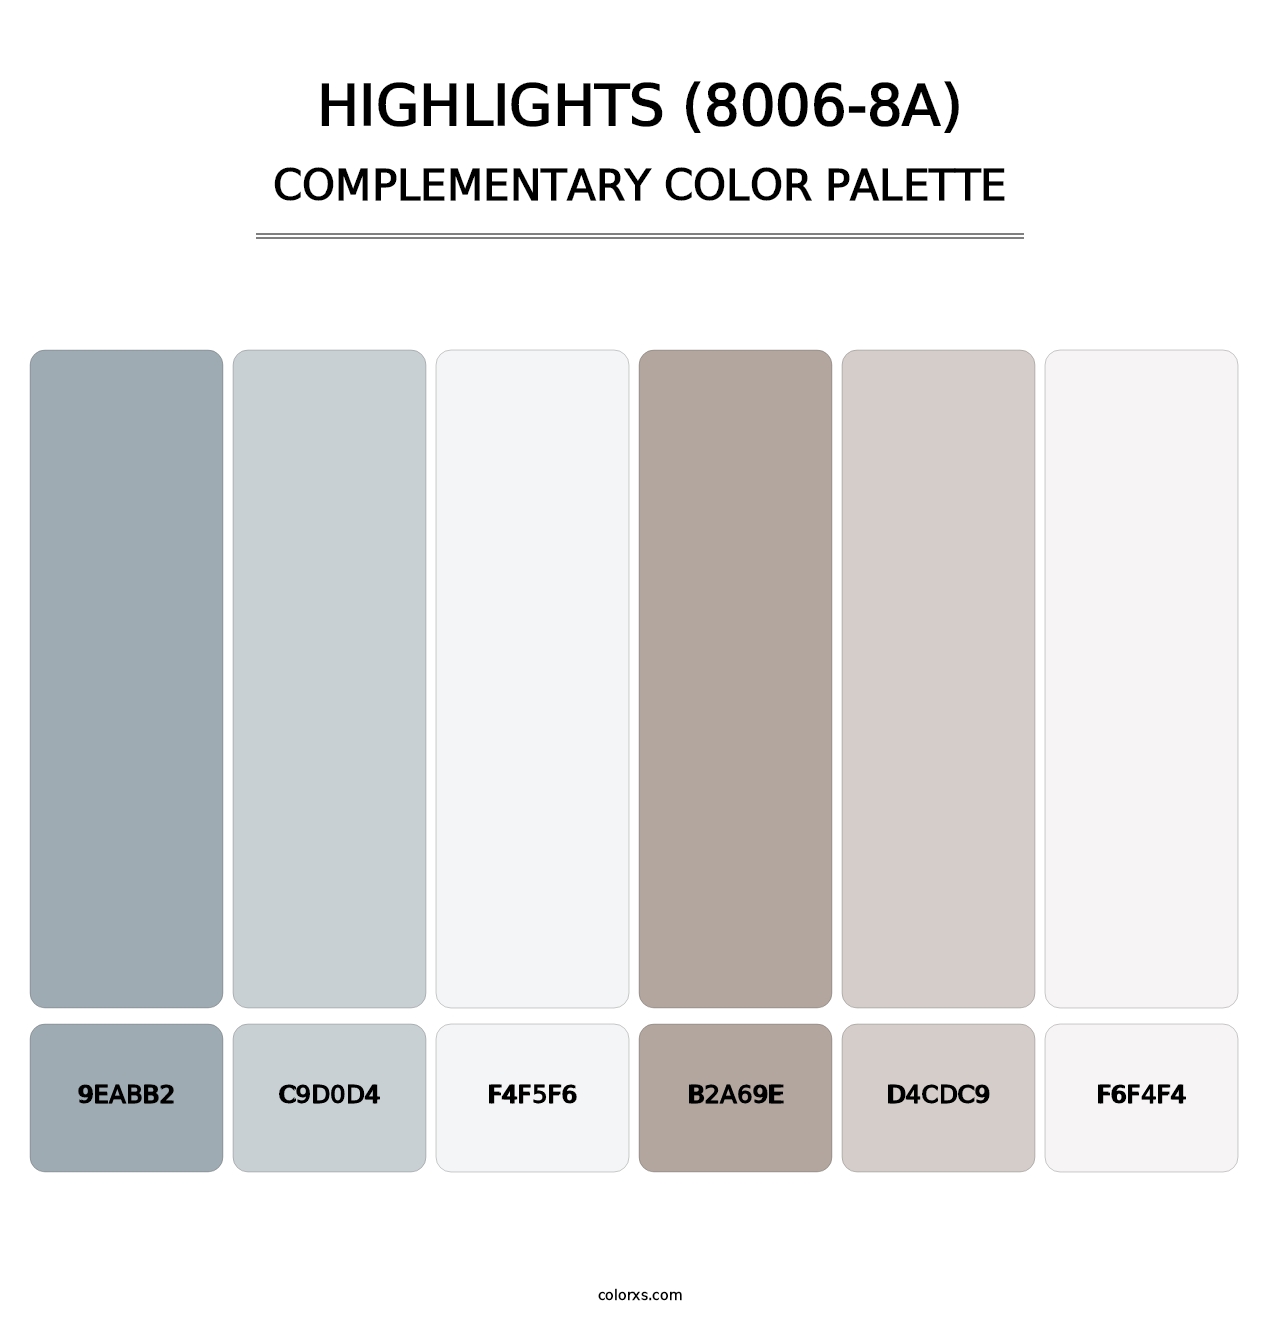 Highlights (8006-8A) - Complementary Color Palette